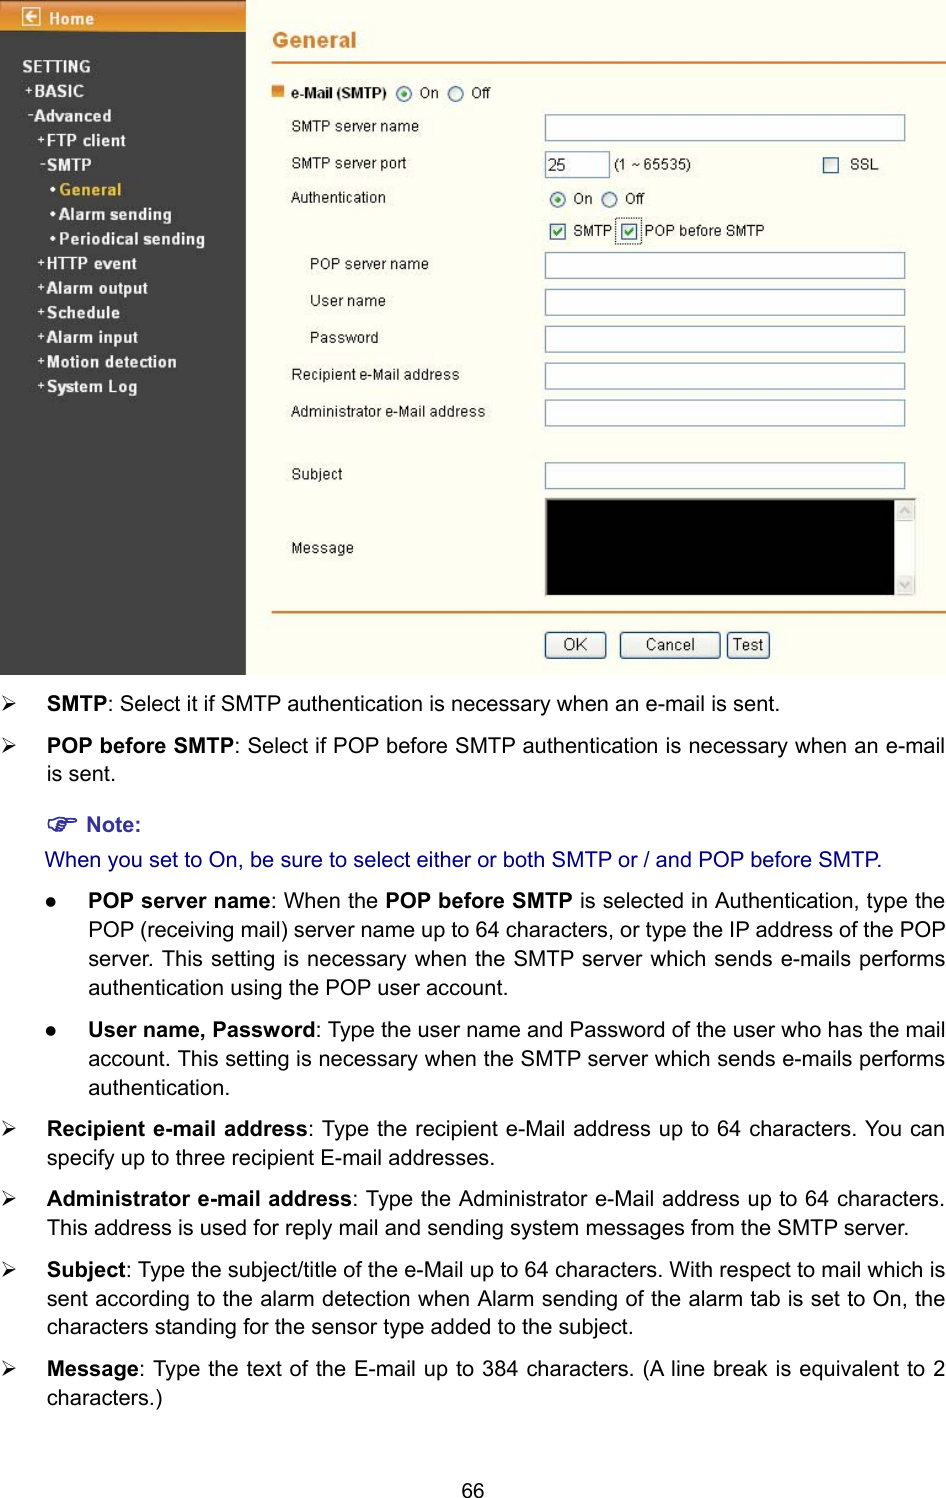 66  ¾ SMTP: Select it if SMTP authentication is necessary when an e-mail is sent. ¾ POP before SMTP: Select if POP before SMTP authentication is necessary when an e-mail is sent. ) Note: When you set to On, be sure to select either or both SMTP or / and POP before SMTP.   z POP server name: When the POP before SMTP is selected in Authentication, type the POP (receiving mail) server name up to 64 characters, or type the IP address of the POP server. This setting is necessary when the SMTP server which sends e-mails performs authentication using the POP user account.   z User name, Password: Type the user name and Password of the user who has the mail account. This setting is necessary when the SMTP server which sends e-mails performs authentication. ¾ Recipient e-mail address: Type the recipient e-Mail address up to 64 characters. You can specify up to three recipient E-mail addresses. ¾ Administrator e-mail address: Type the Administrator e-Mail address up to 64 characters. This address is used for reply mail and sending system messages from the SMTP server. ¾ Subject: Type the subject/title of the e-Mail up to 64 characters. With respect to mail which is sent according to the alarm detection when Alarm sending of the alarm tab is set to On, the characters standing for the sensor type added to the subject. ¾ Message: Type the text of the E-mail up to 384 characters. (A line break is equivalent to 2 characters.) 